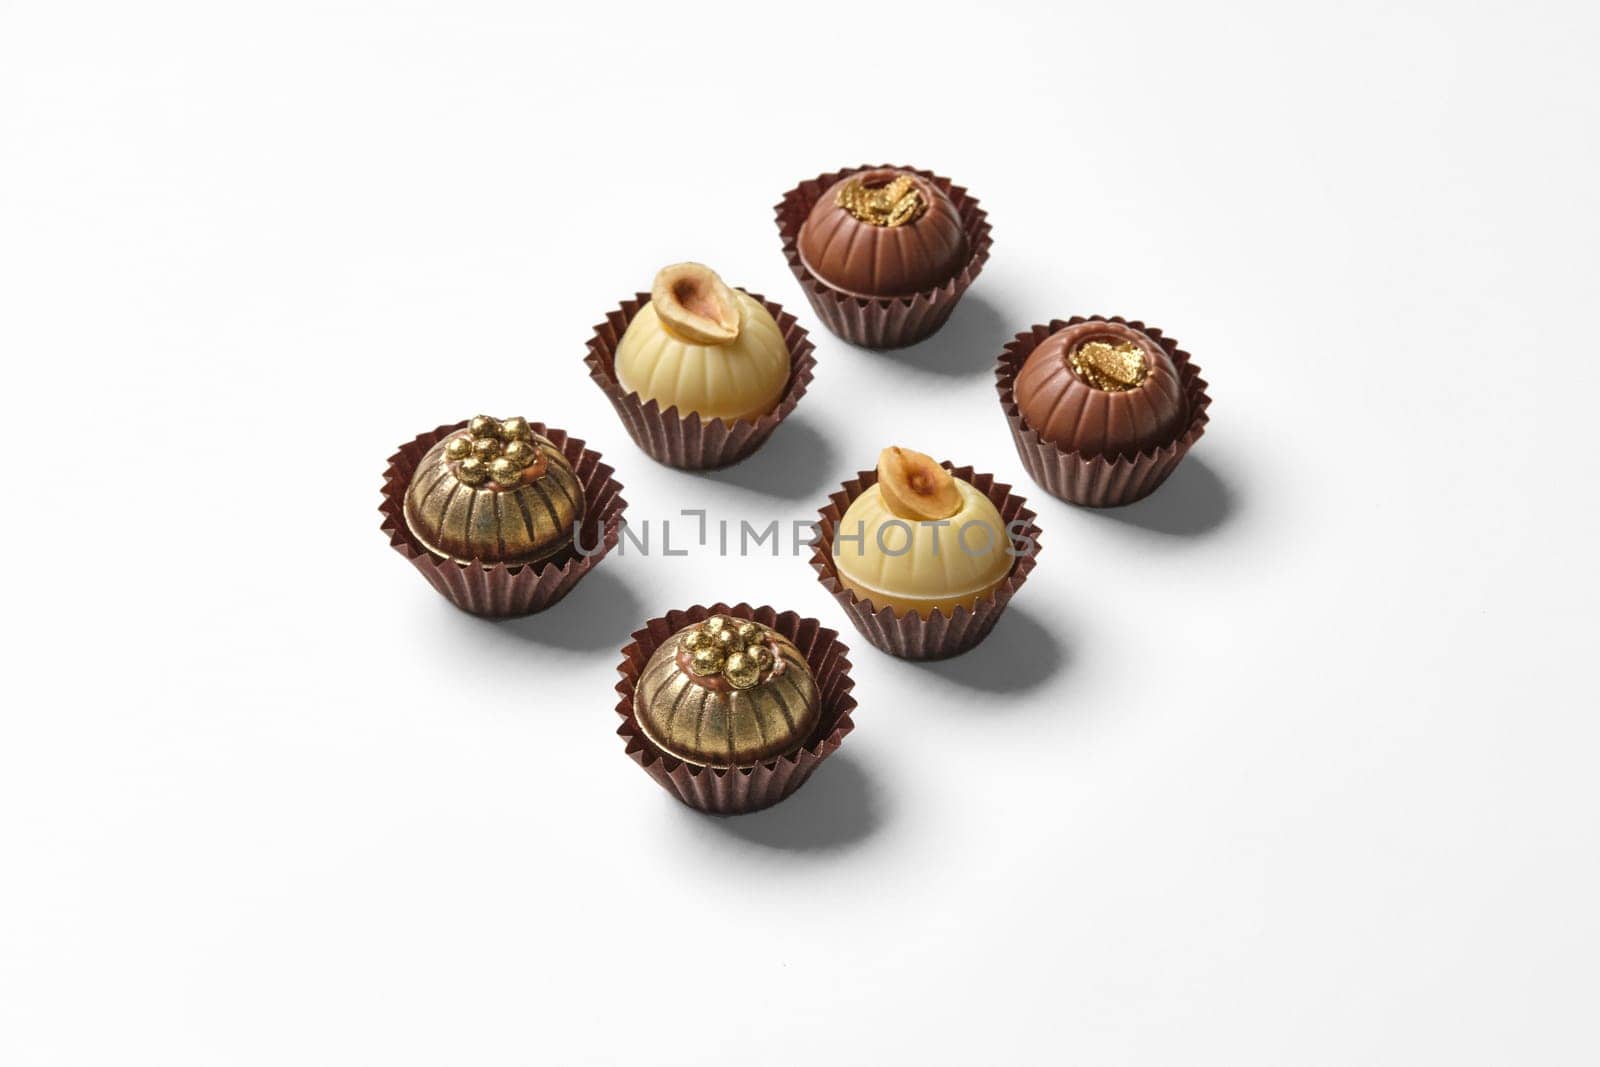 Elegant artisan chocolates decorated with hazelnuts, caramel crumbs and golden pearls, on white background